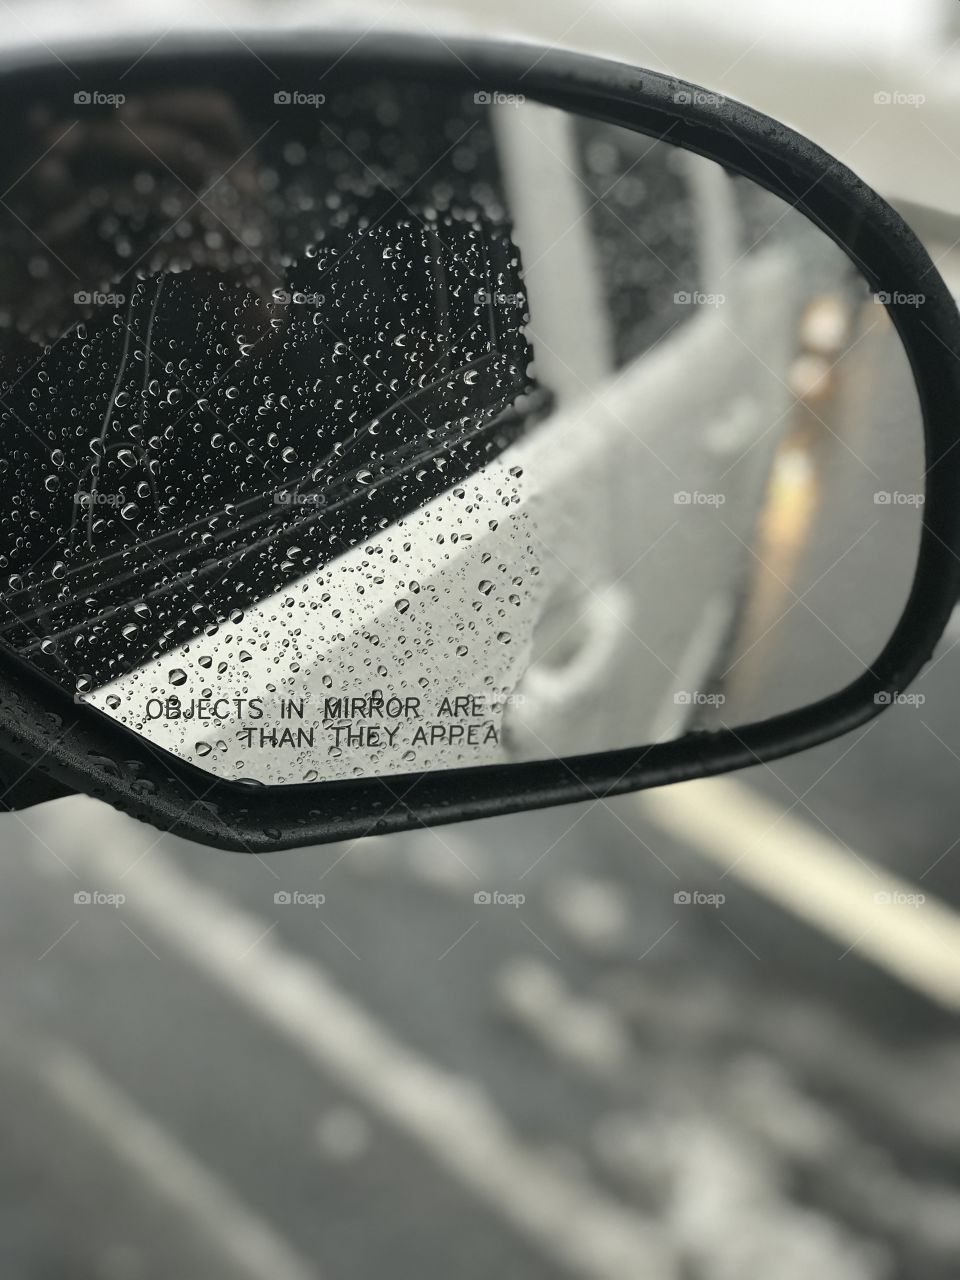 Closer than they appear!